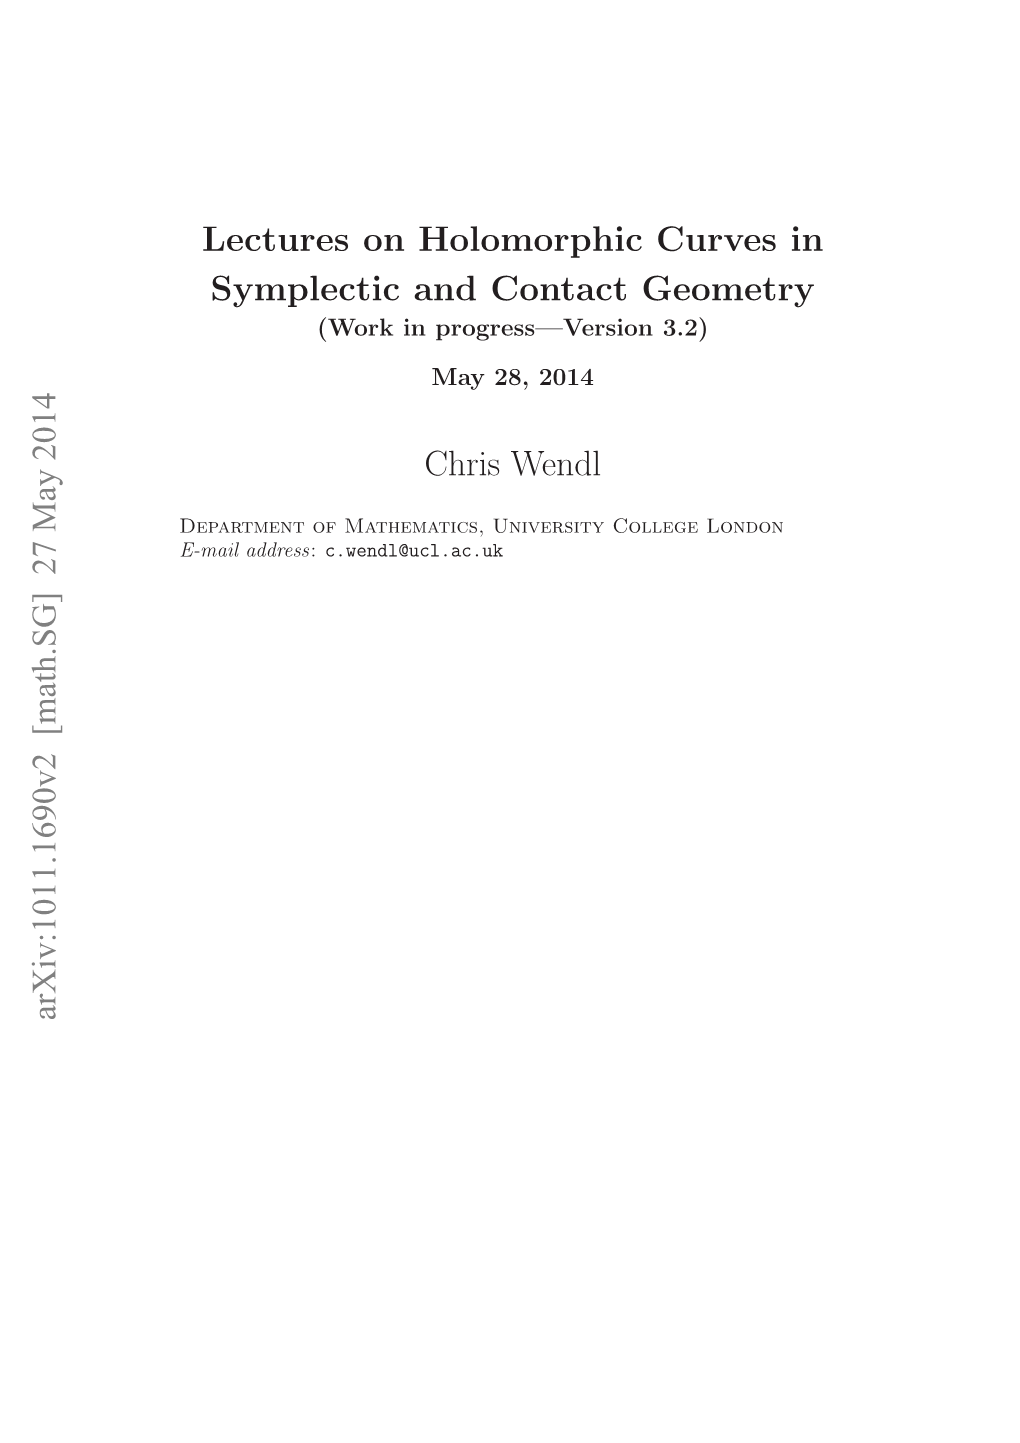 Lectures on Holomorphic Curves in Symplectic and Contact Geometry